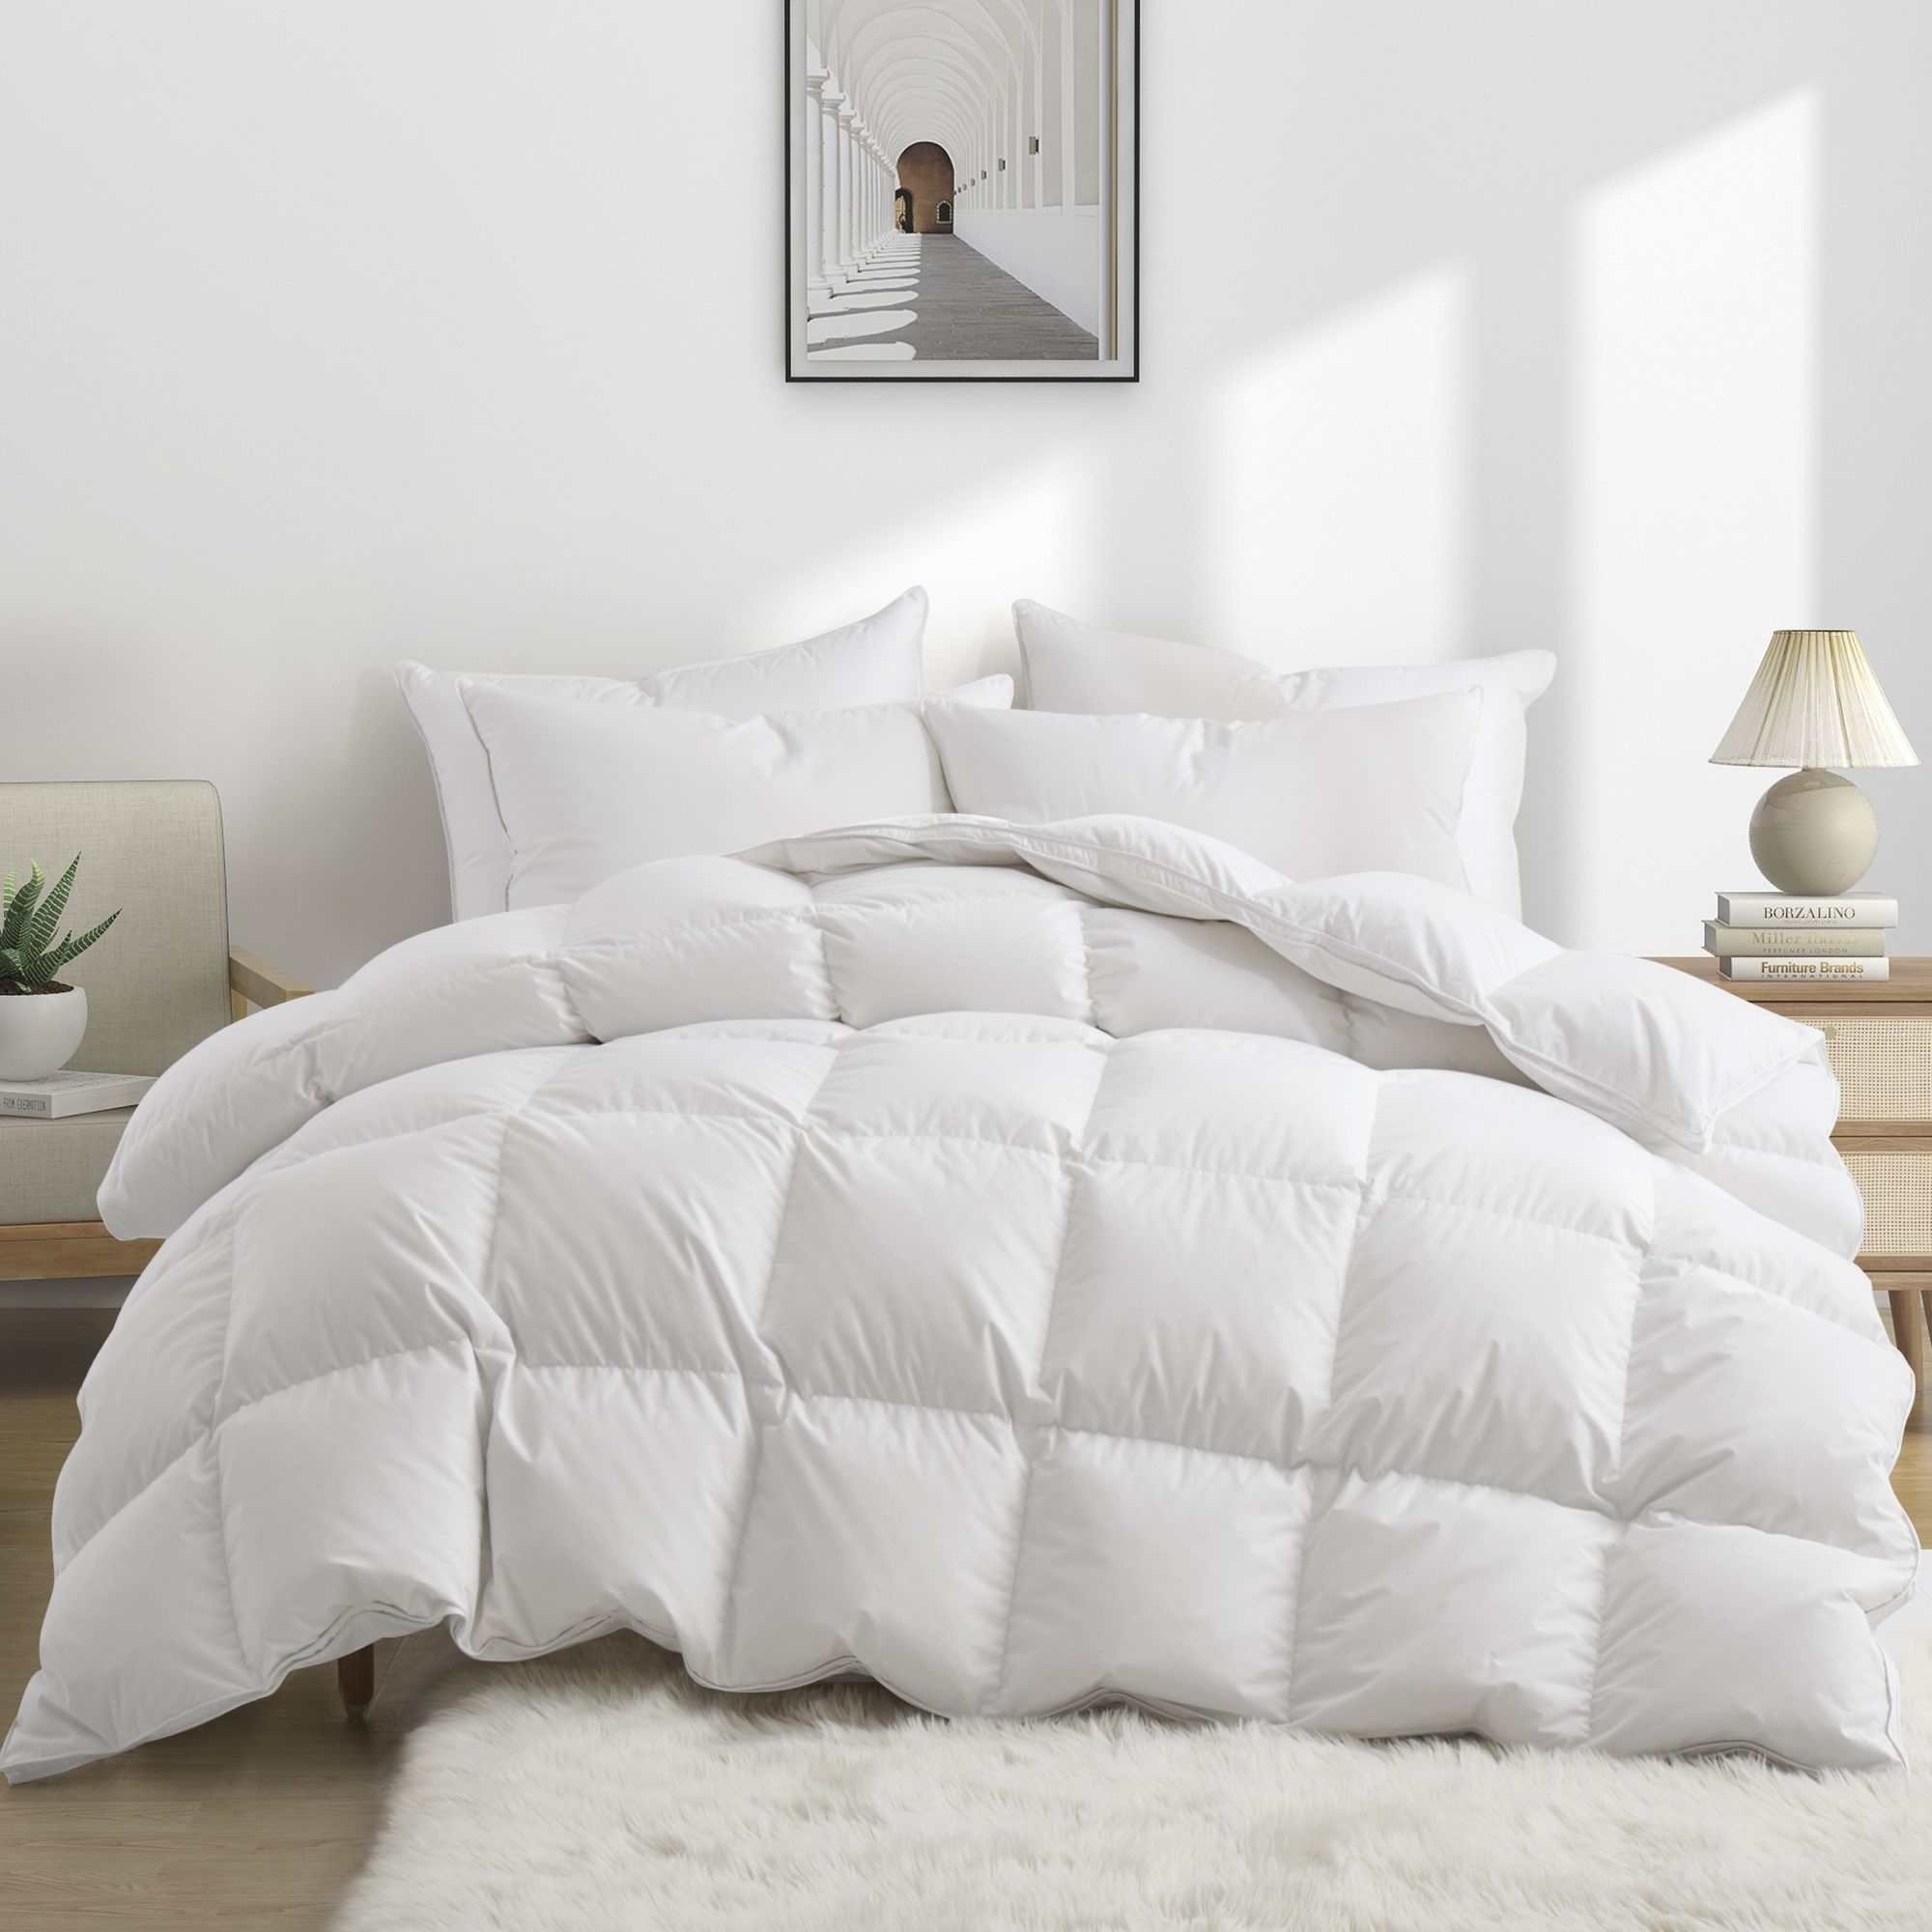 800 Fill Power European White Down Comforter-Heavy Weight Comforter For Cold Winter - Full/Queen Size